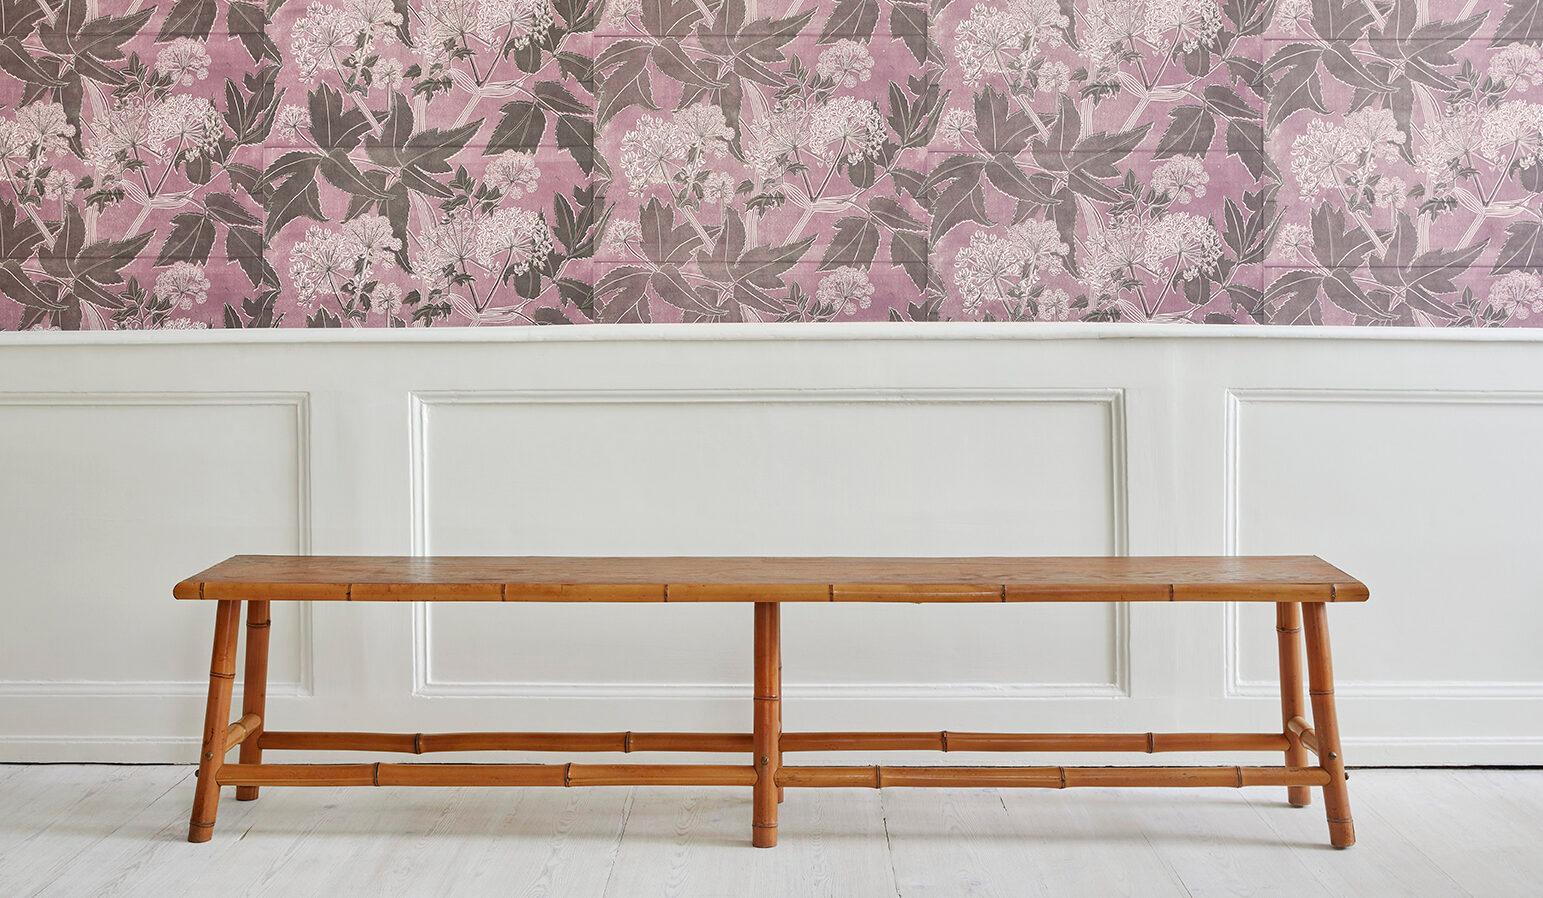 France, 1960s

Bench with bamboo legs and wooden seat.

Measures: H 41 x W 182.5 x D 30 cm.